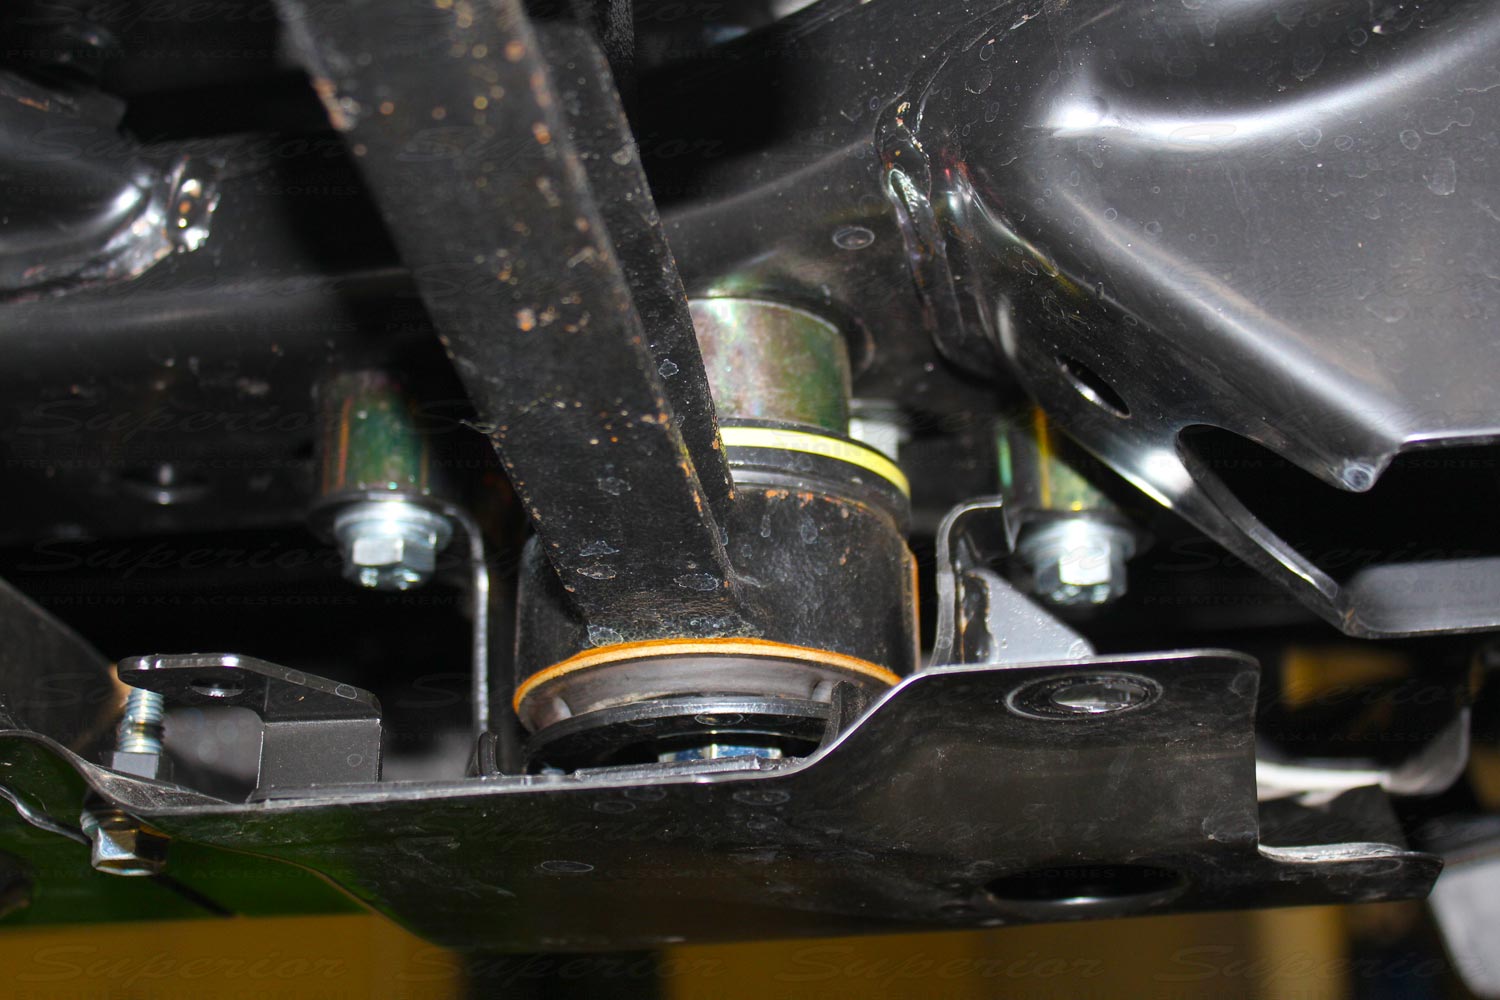 Superior Diff Drop spacers fitted to the 200 Series Landcruiser